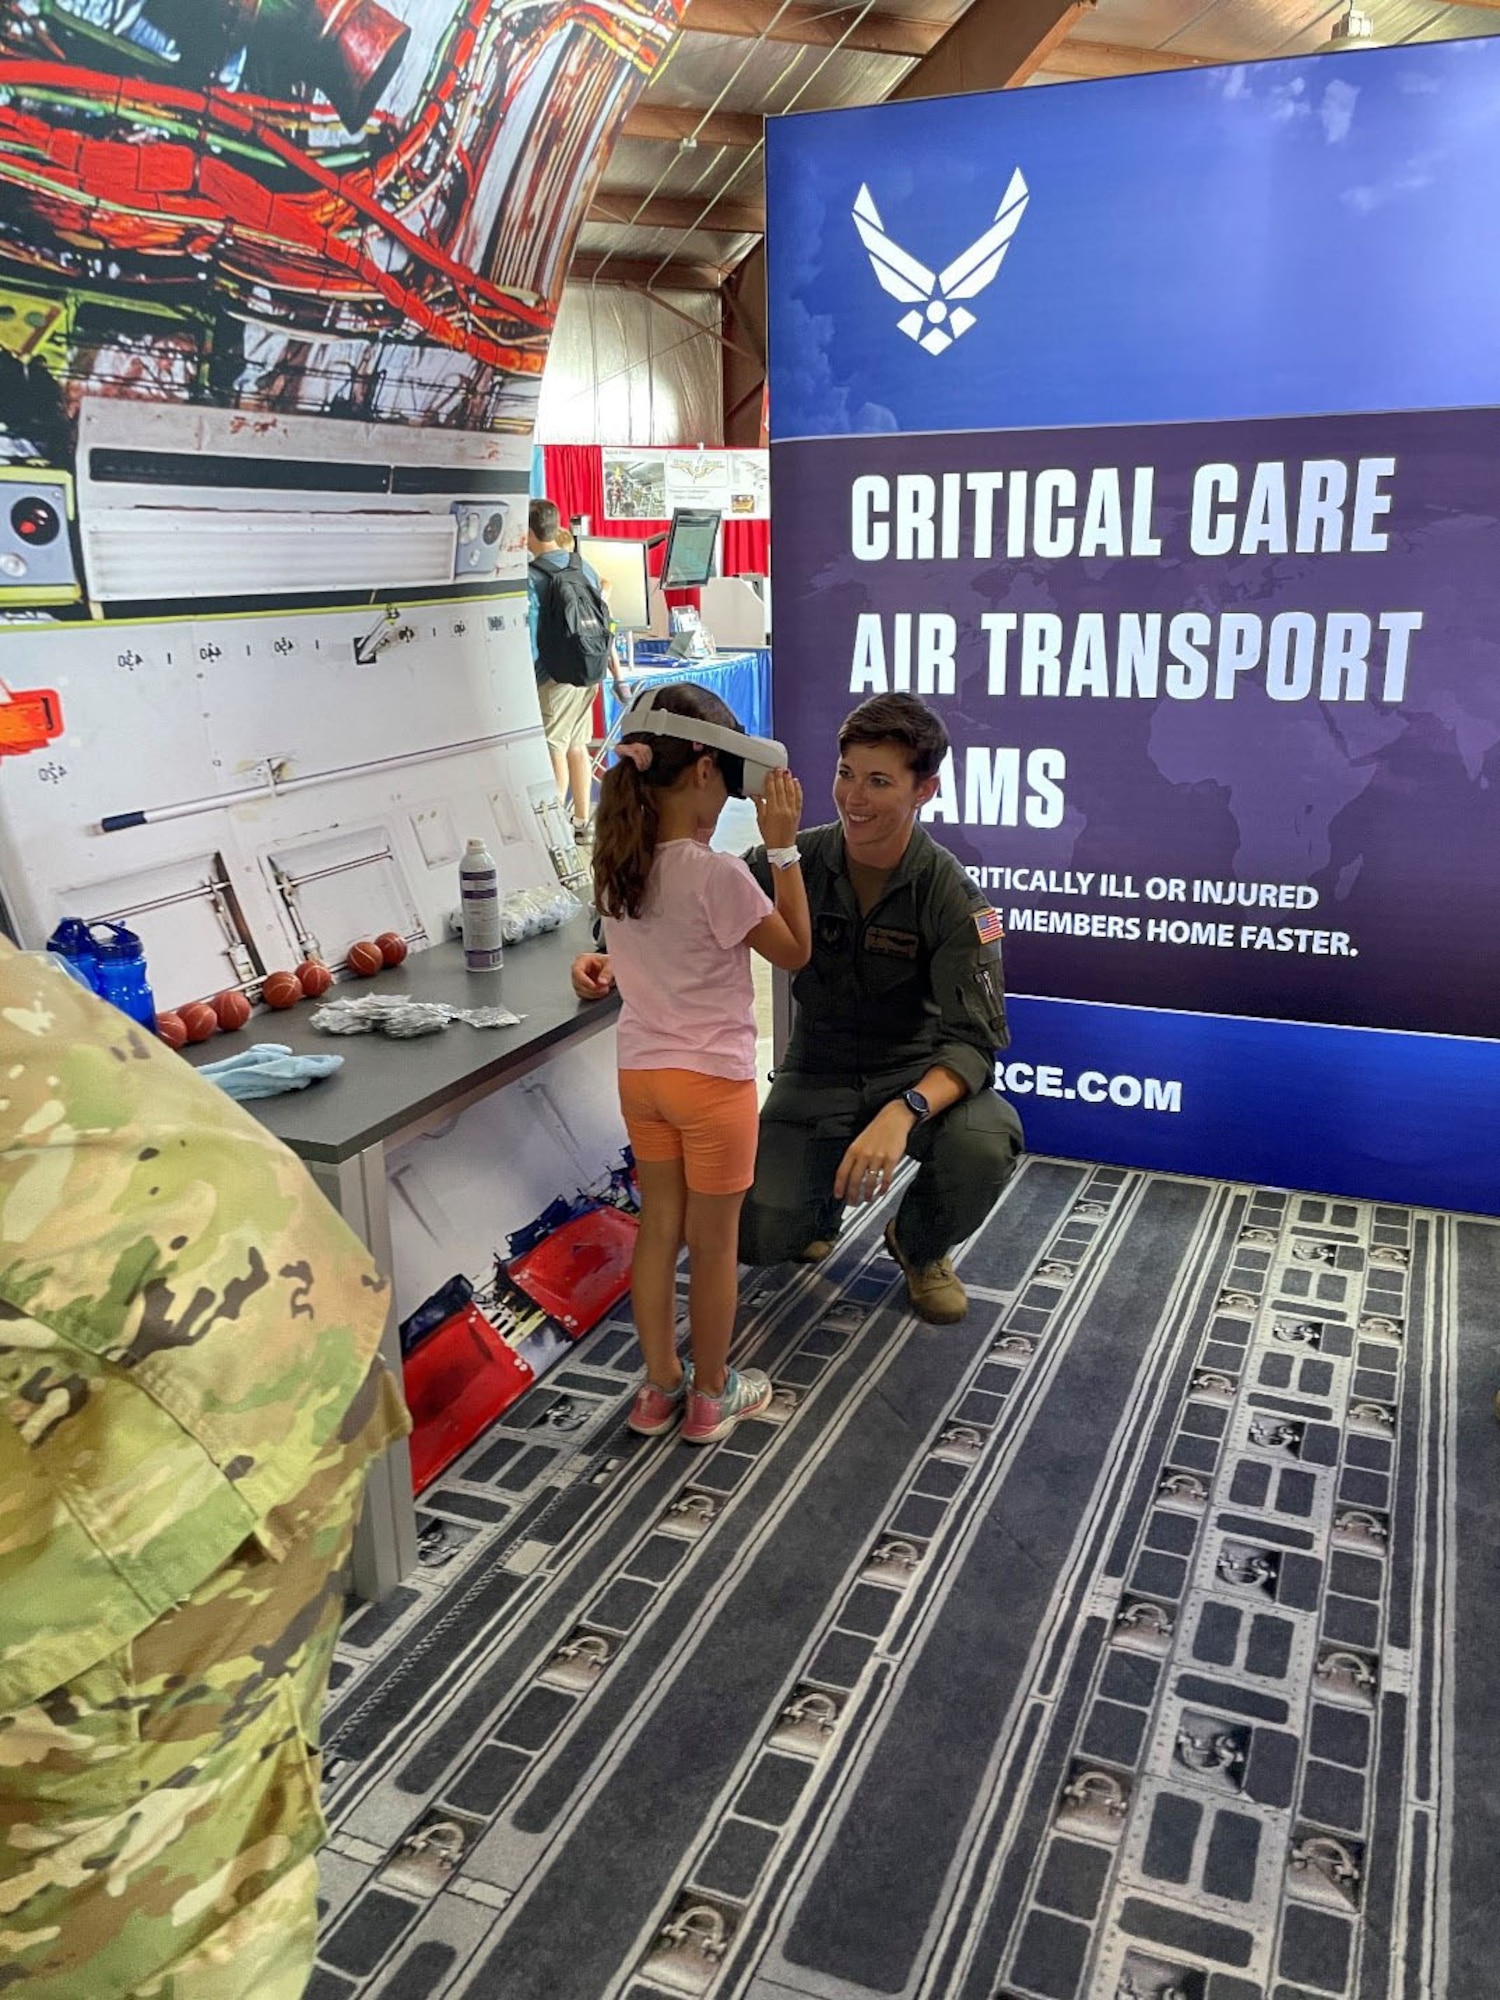 Capt. Blaine Driscoll, a U-28 Combat Systems Officer assigned to the 318th Special Operations Squadron, shows a student attending the Experimental Aircraft Association (EAA) AirVenture Air Show what an experience it is to operate an F-22 Raptor from the perspective of a 360 degree video through a virtual reality headset at Oshkosh, Wis., July 26, 2021.